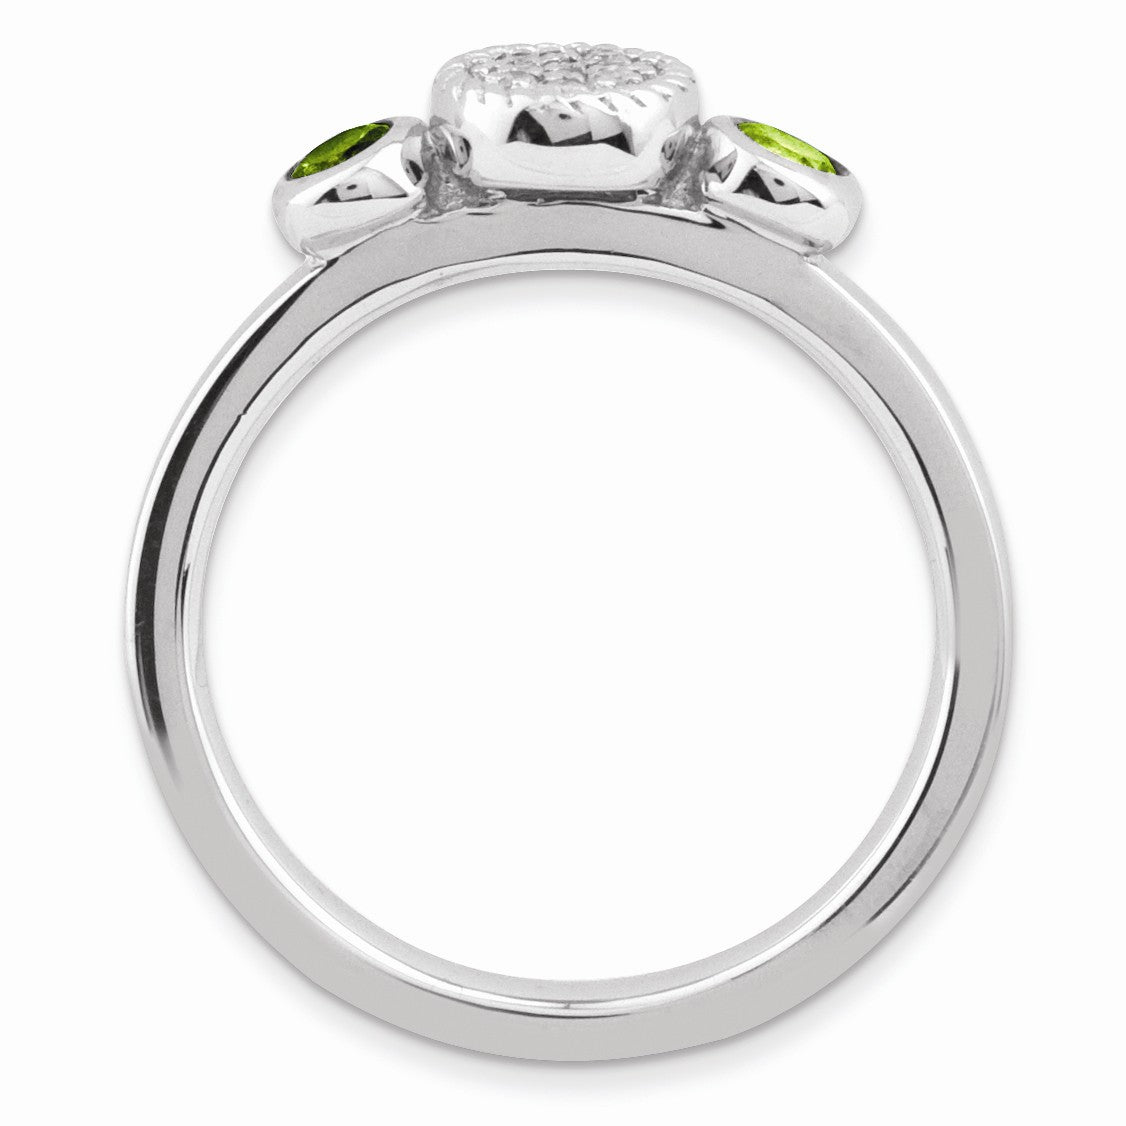 Alternate view of the Sterling Silver Stackable Peridot and .05 Ctw HI/I3 Diamond Ring by The Black Bow Jewelry Co.